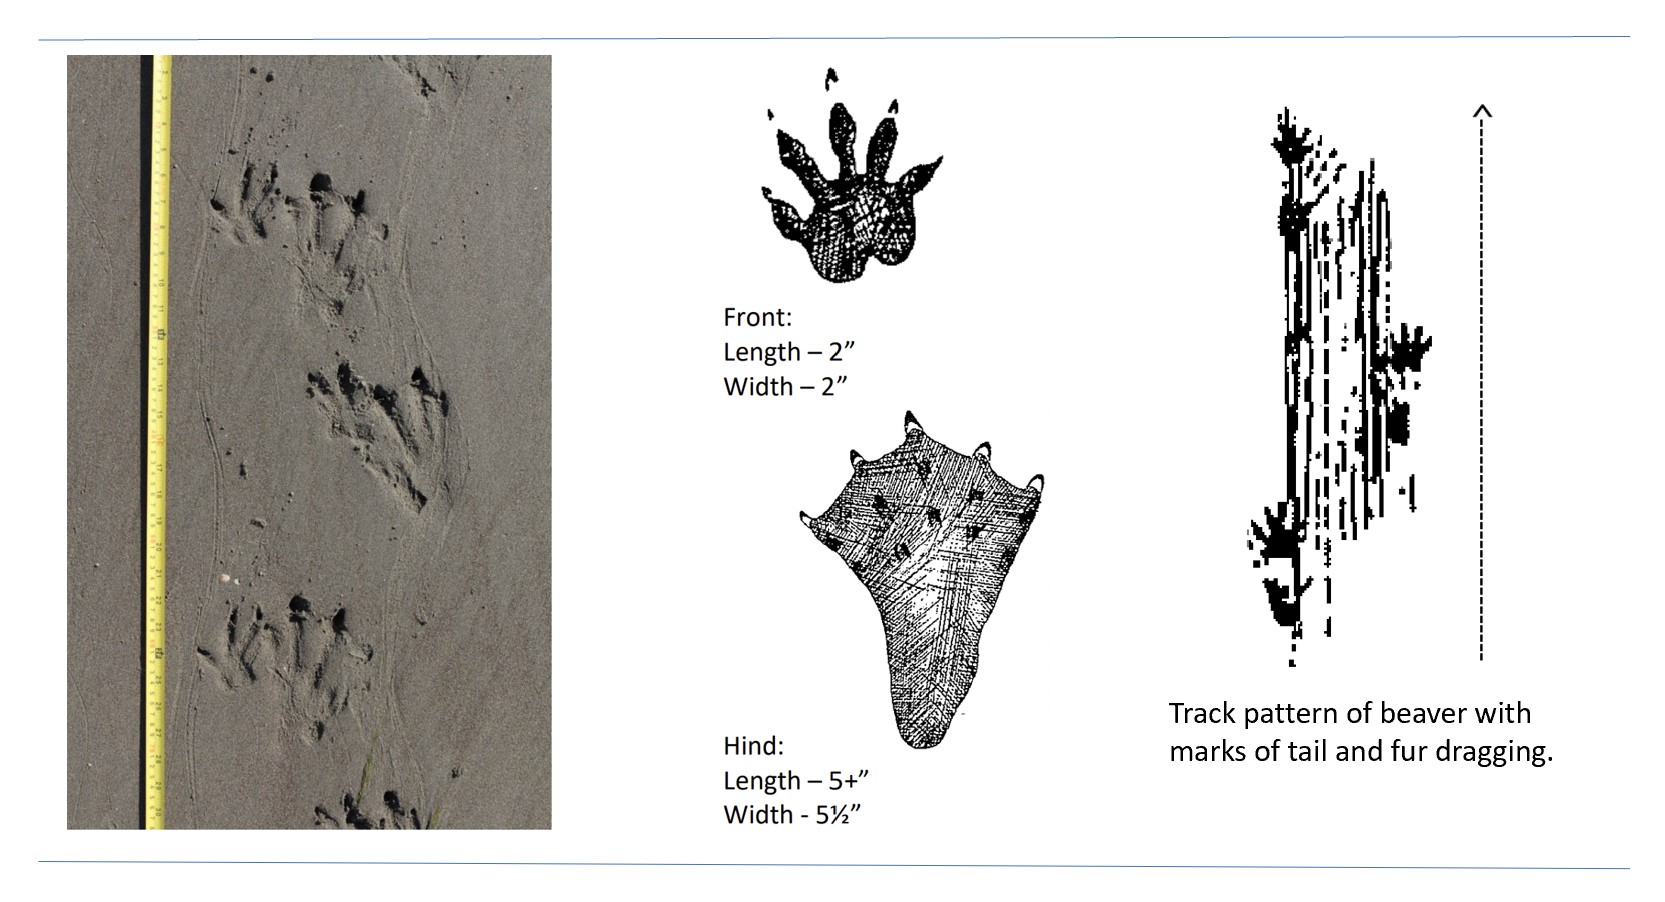 Photo and illustrated tracks of a beaver.